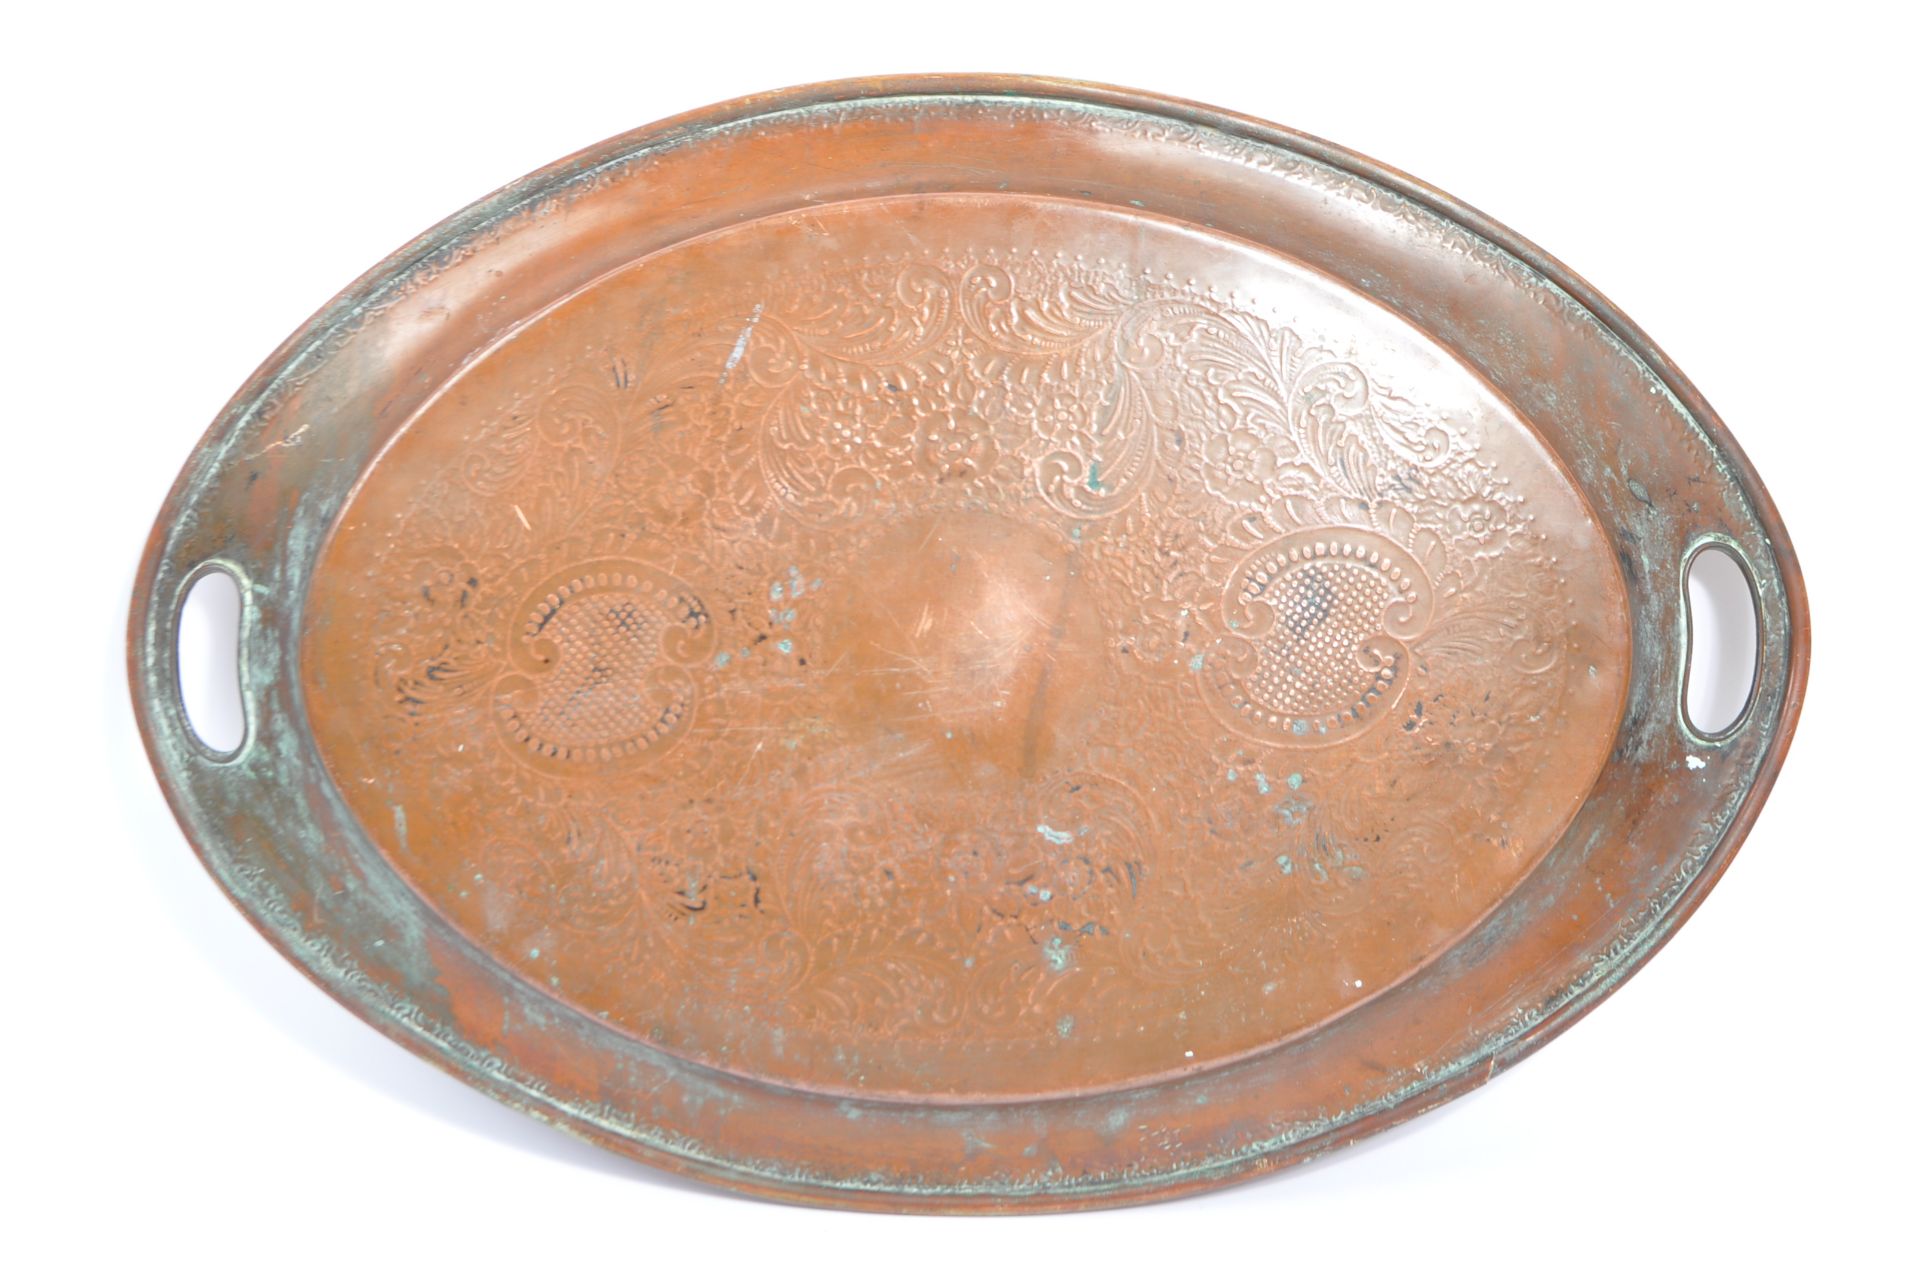 MID 20TH CENTURY OVAL INLAID ORNATE SCROLLWORK COPPER TRAY - Image 4 of 4